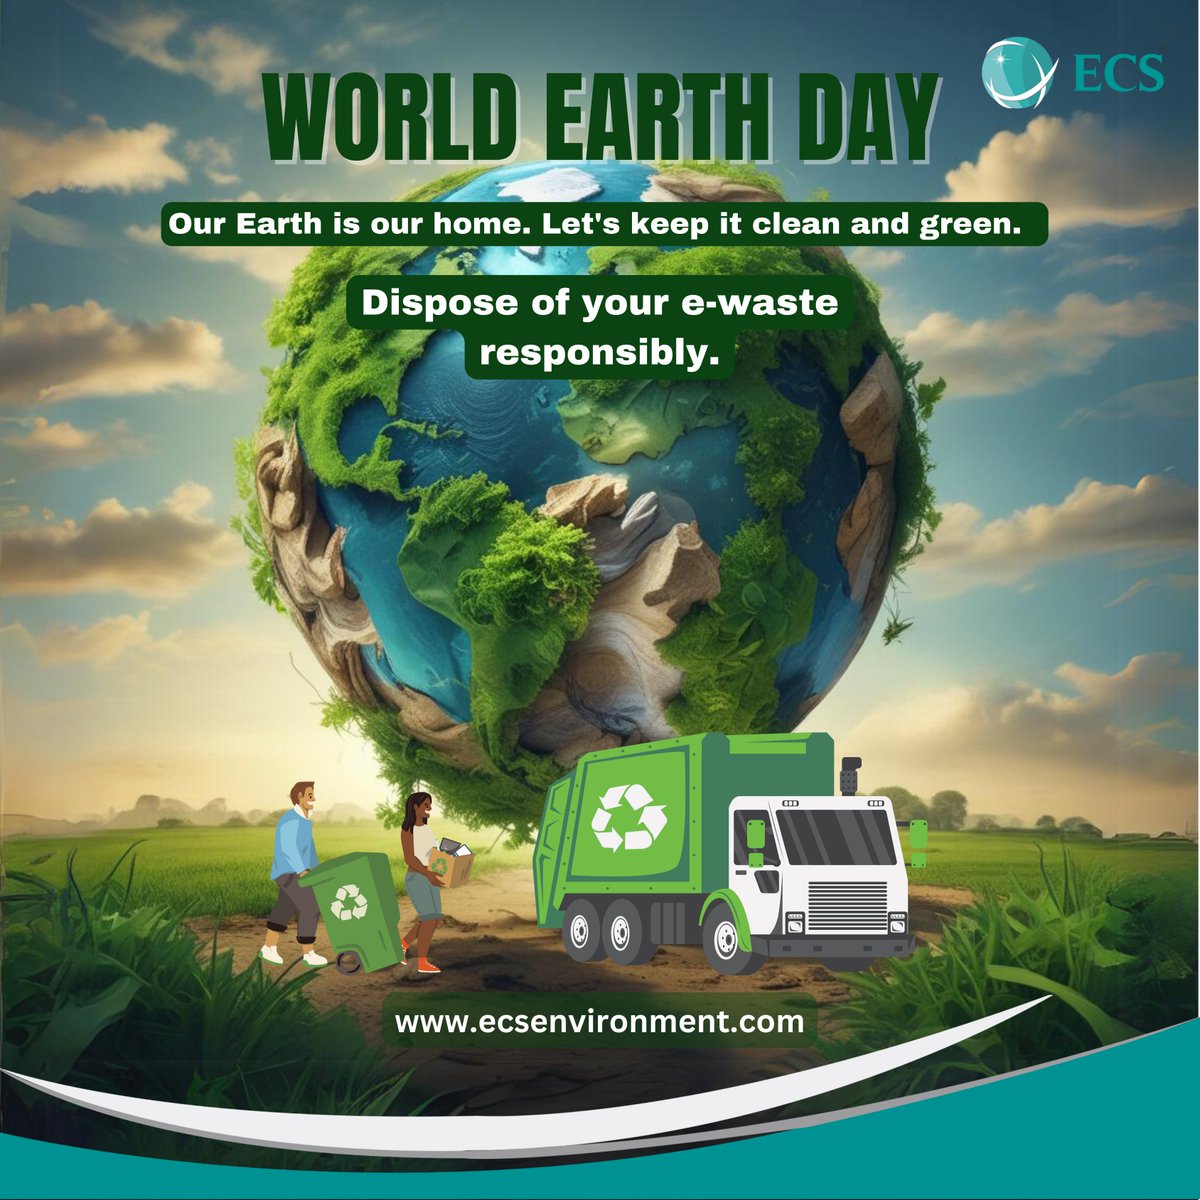 🌍 Let's celebrate World Earth Day by taking action! ♻️ Dispose of e-waste responsibly and recycle with #ECS to contribute to a cleaner, greener future for our planet. Together, let's make every day Earth Day!

#WorldEarthDay #RecycleResponsibly #ewaste #reuse #recycle #repairs